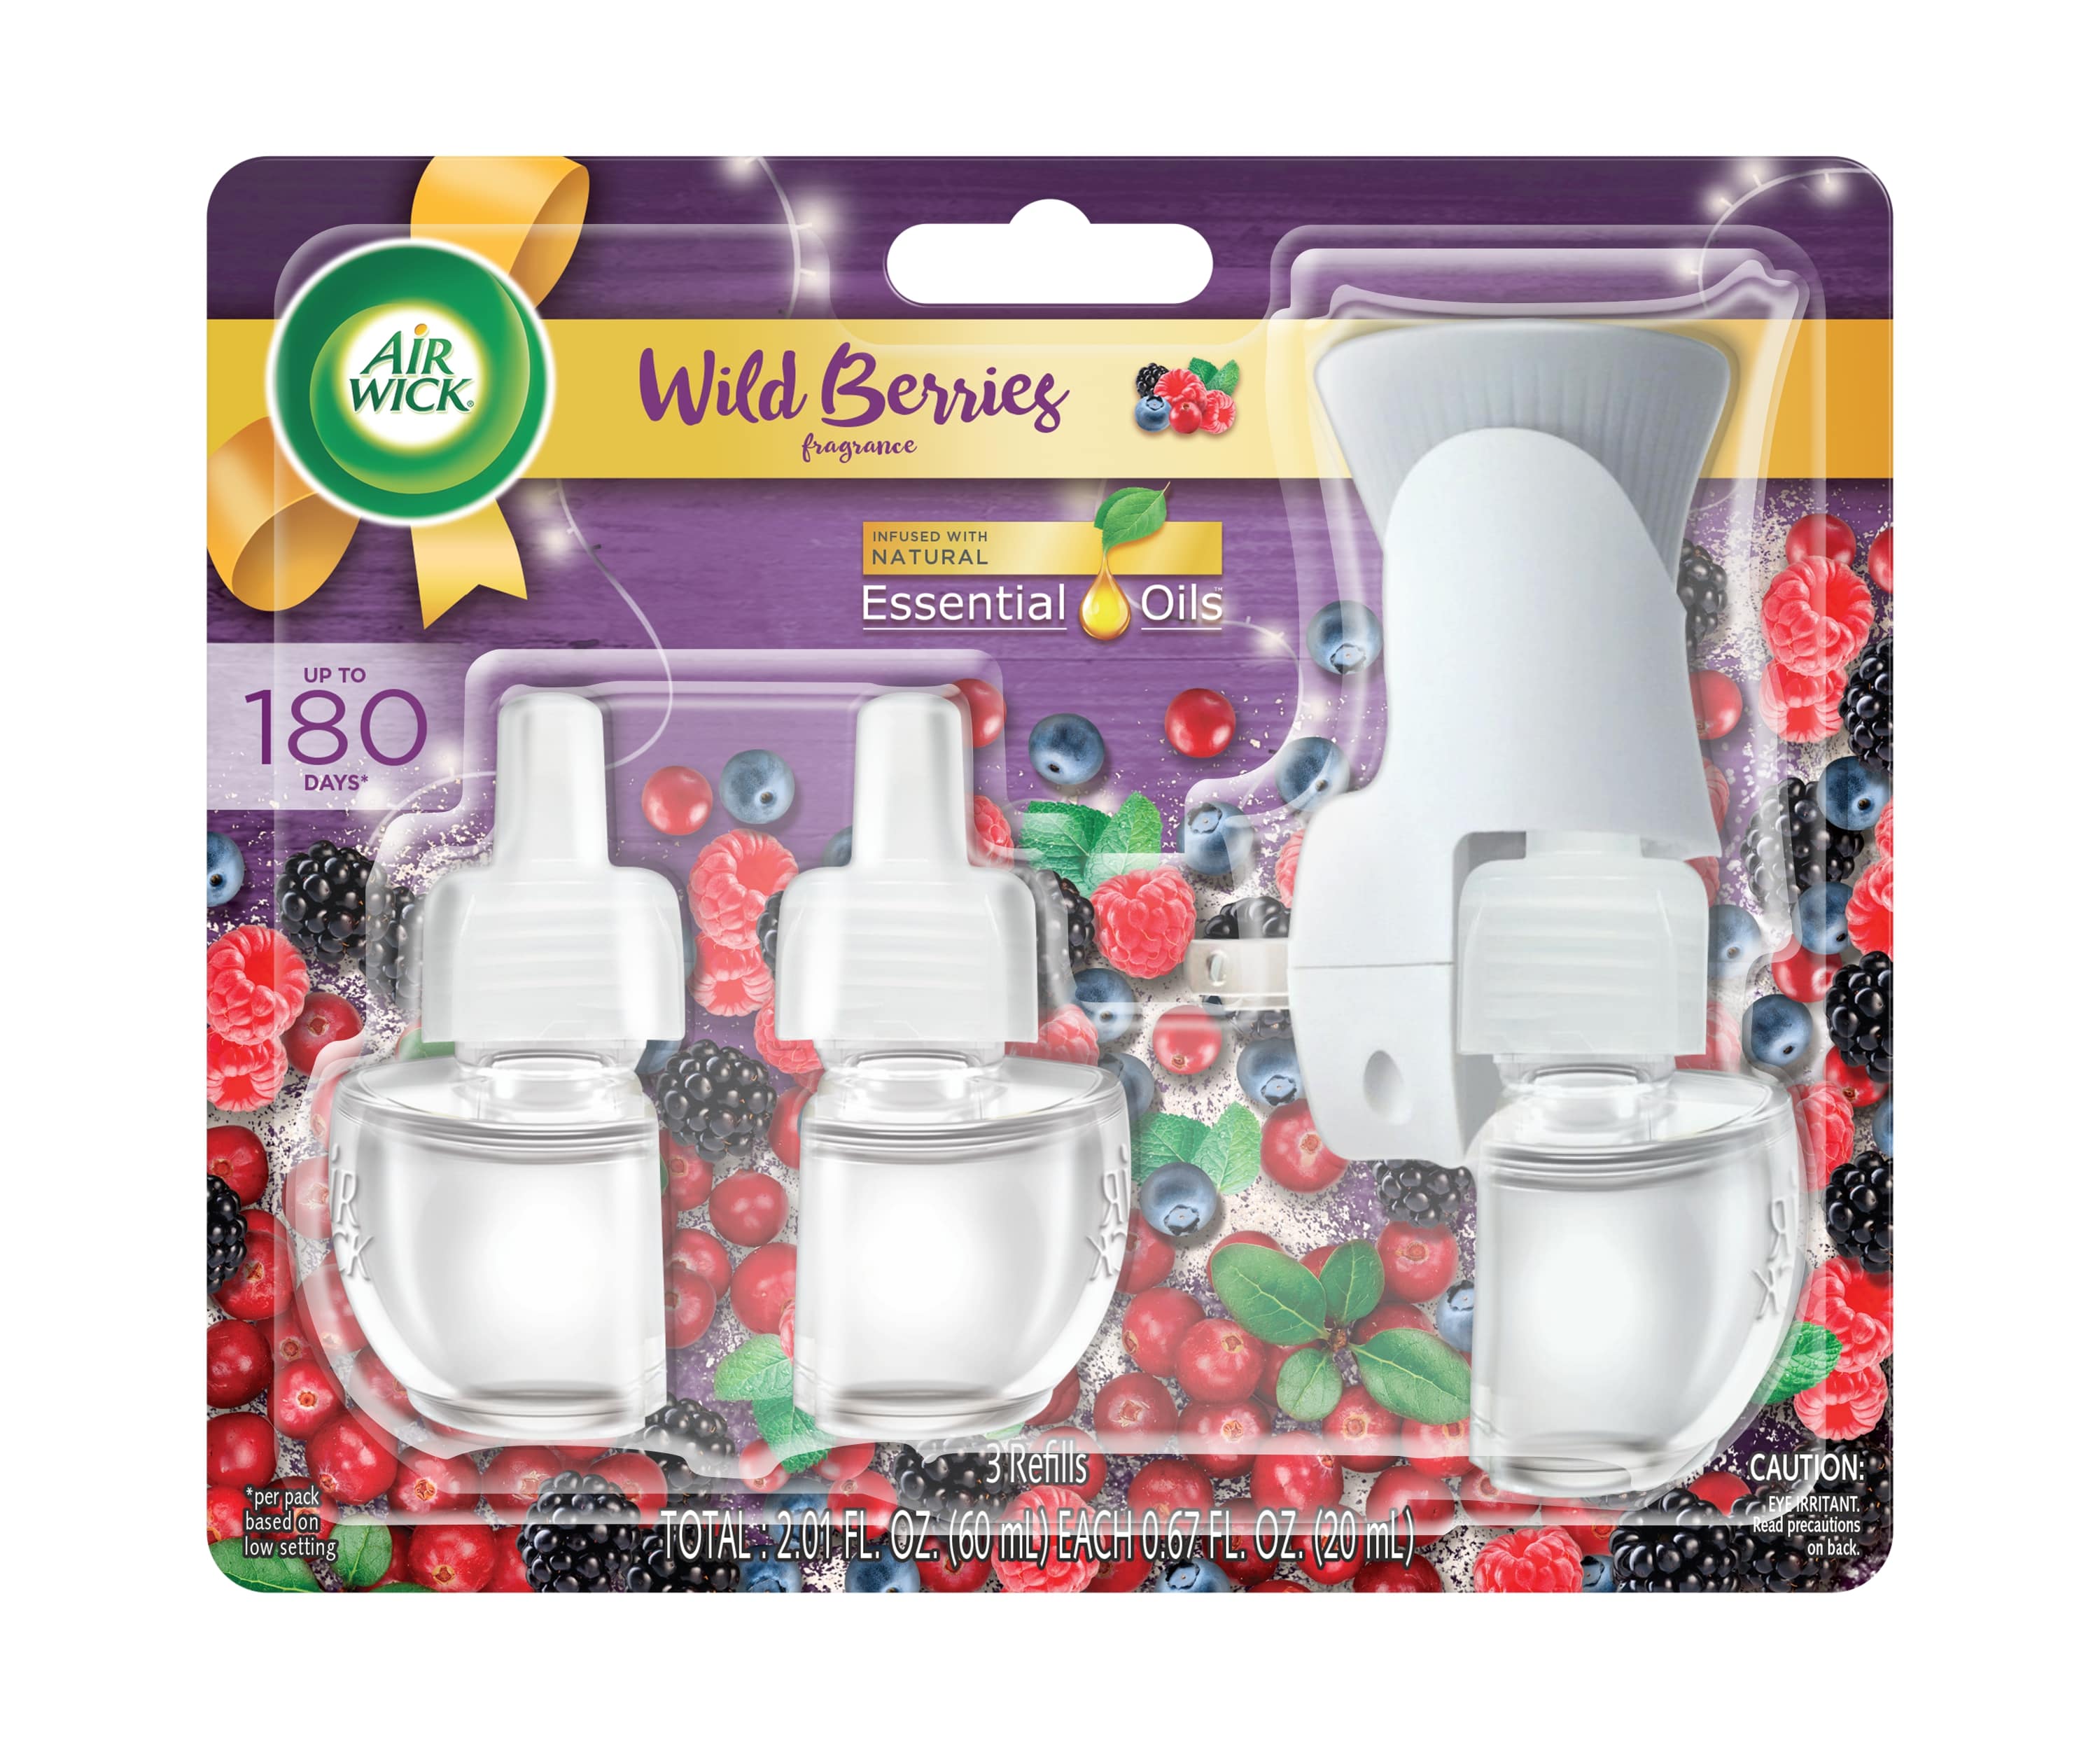 AIR WICK Scented Oil  Wild Berries  Kit Discontinued